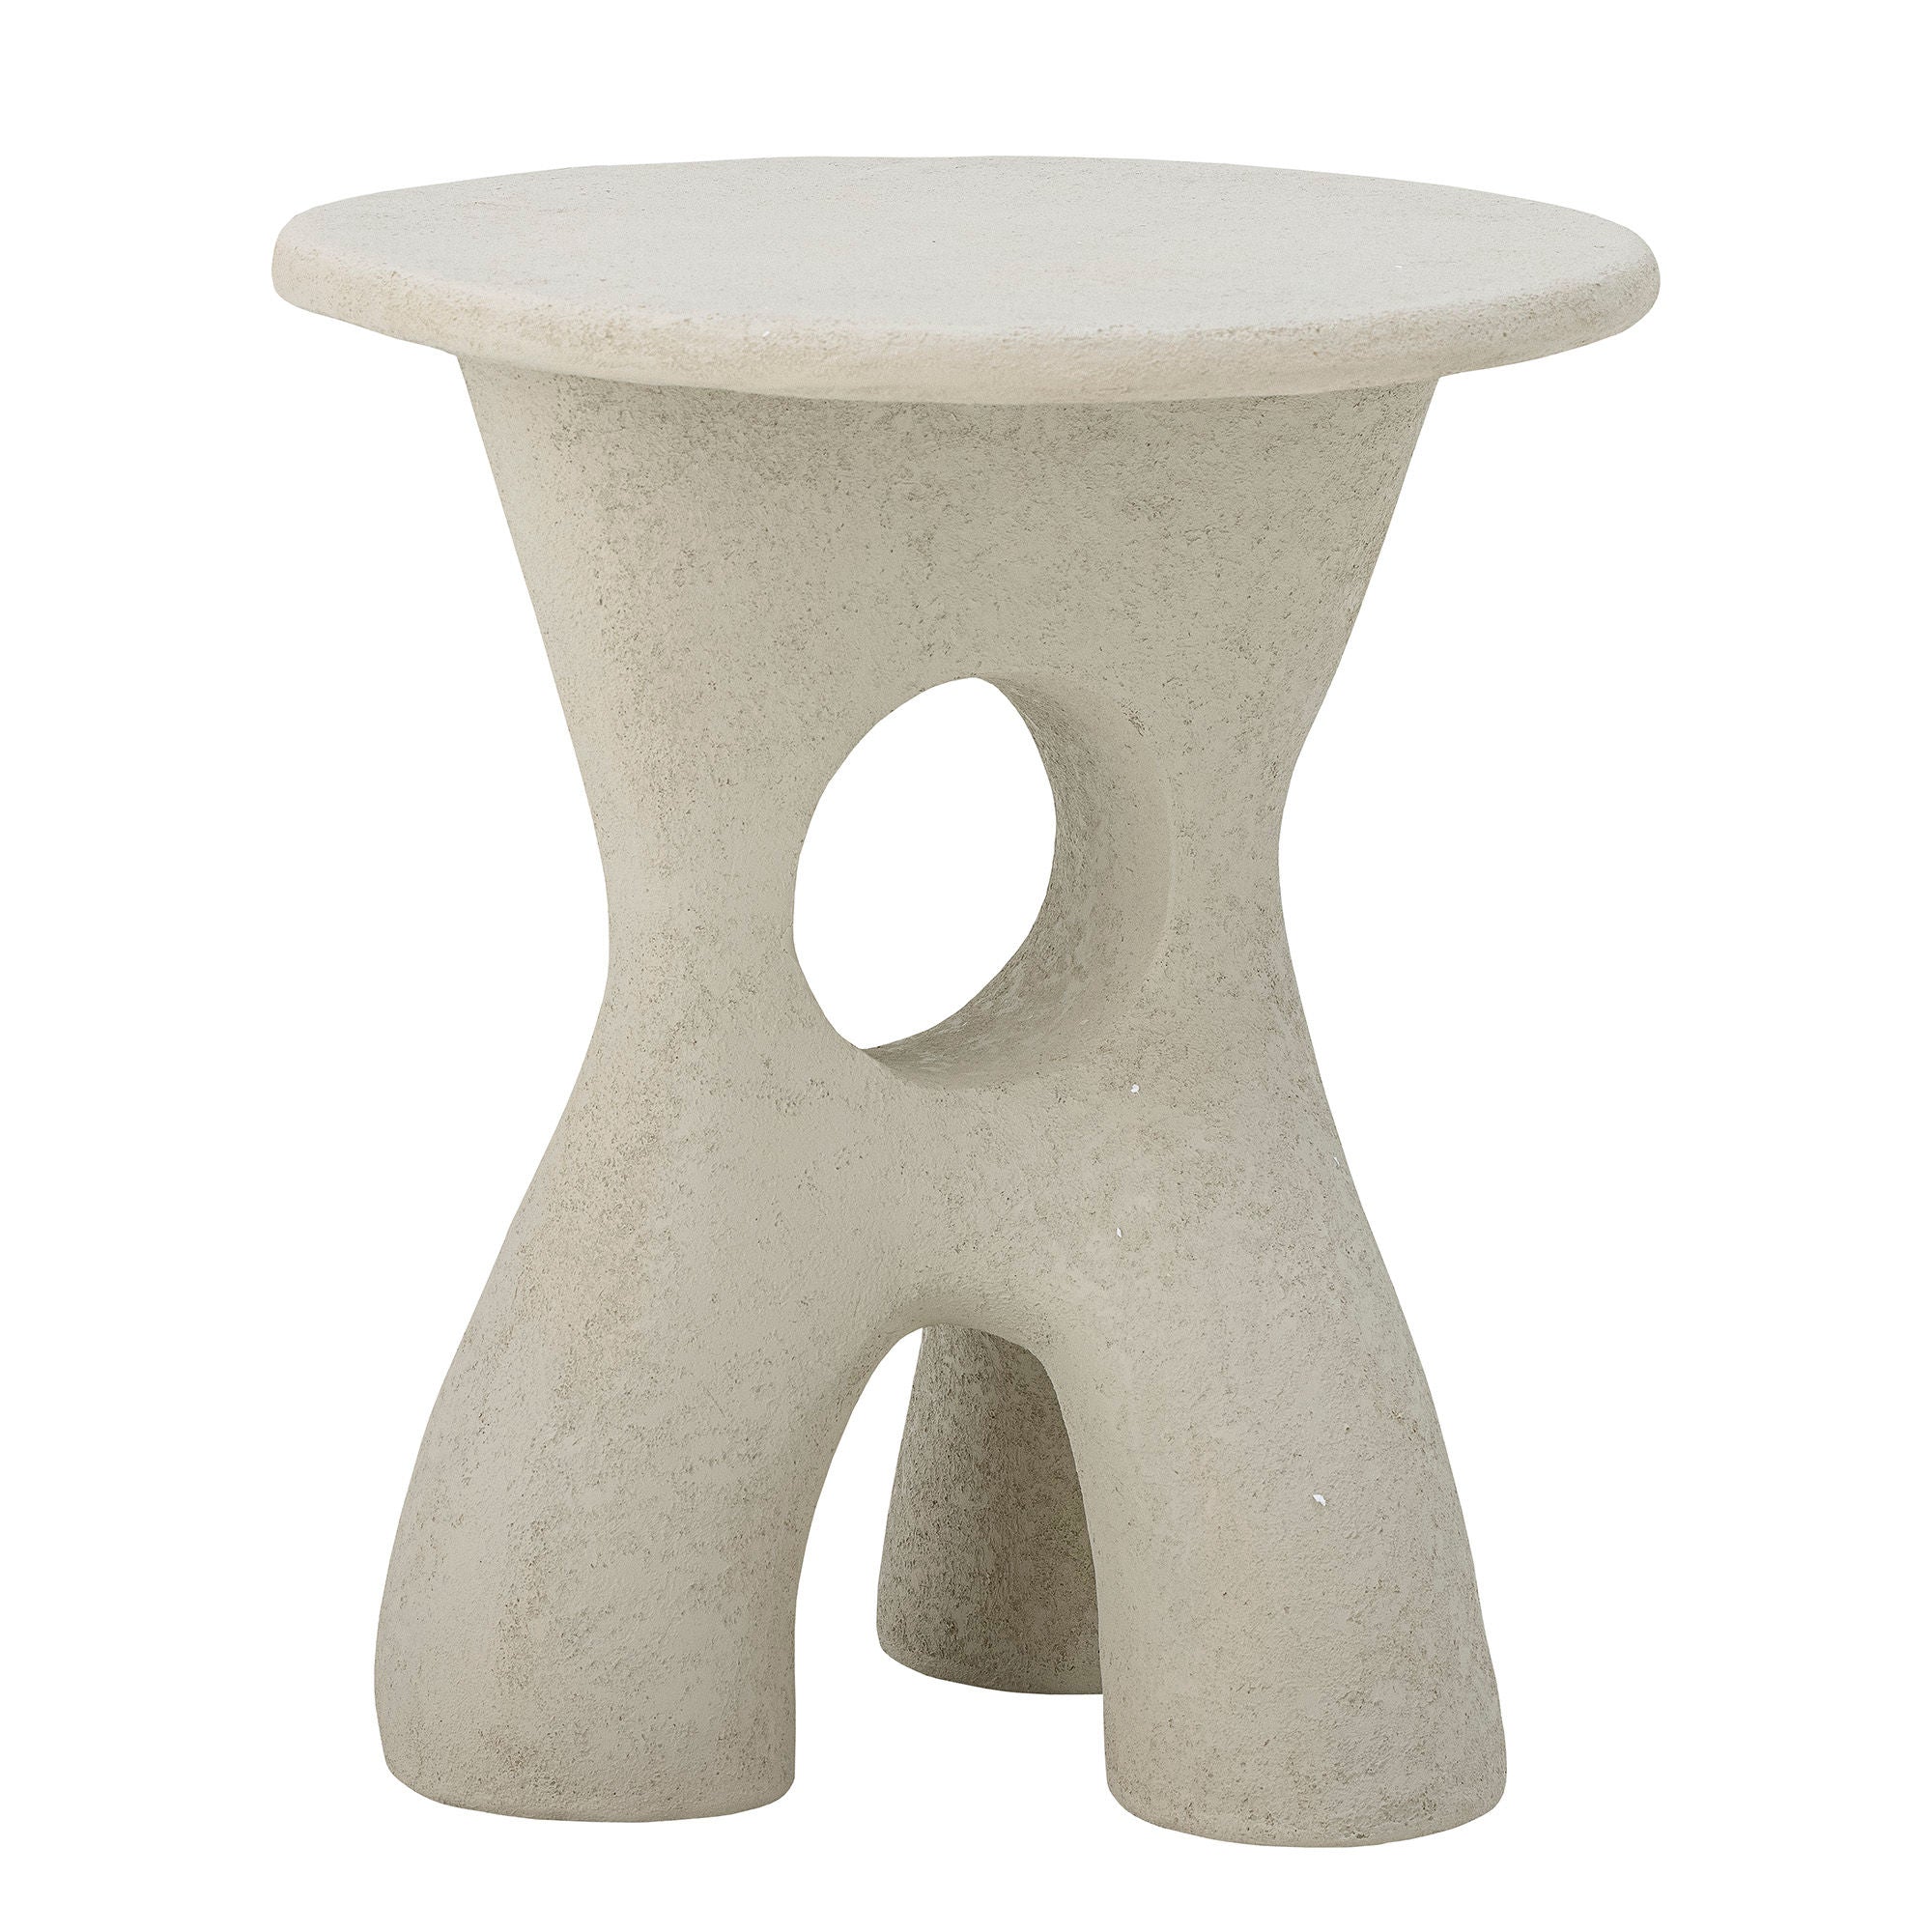 Table d'appoint Amiee de Bloomingville, blanc, polyresin